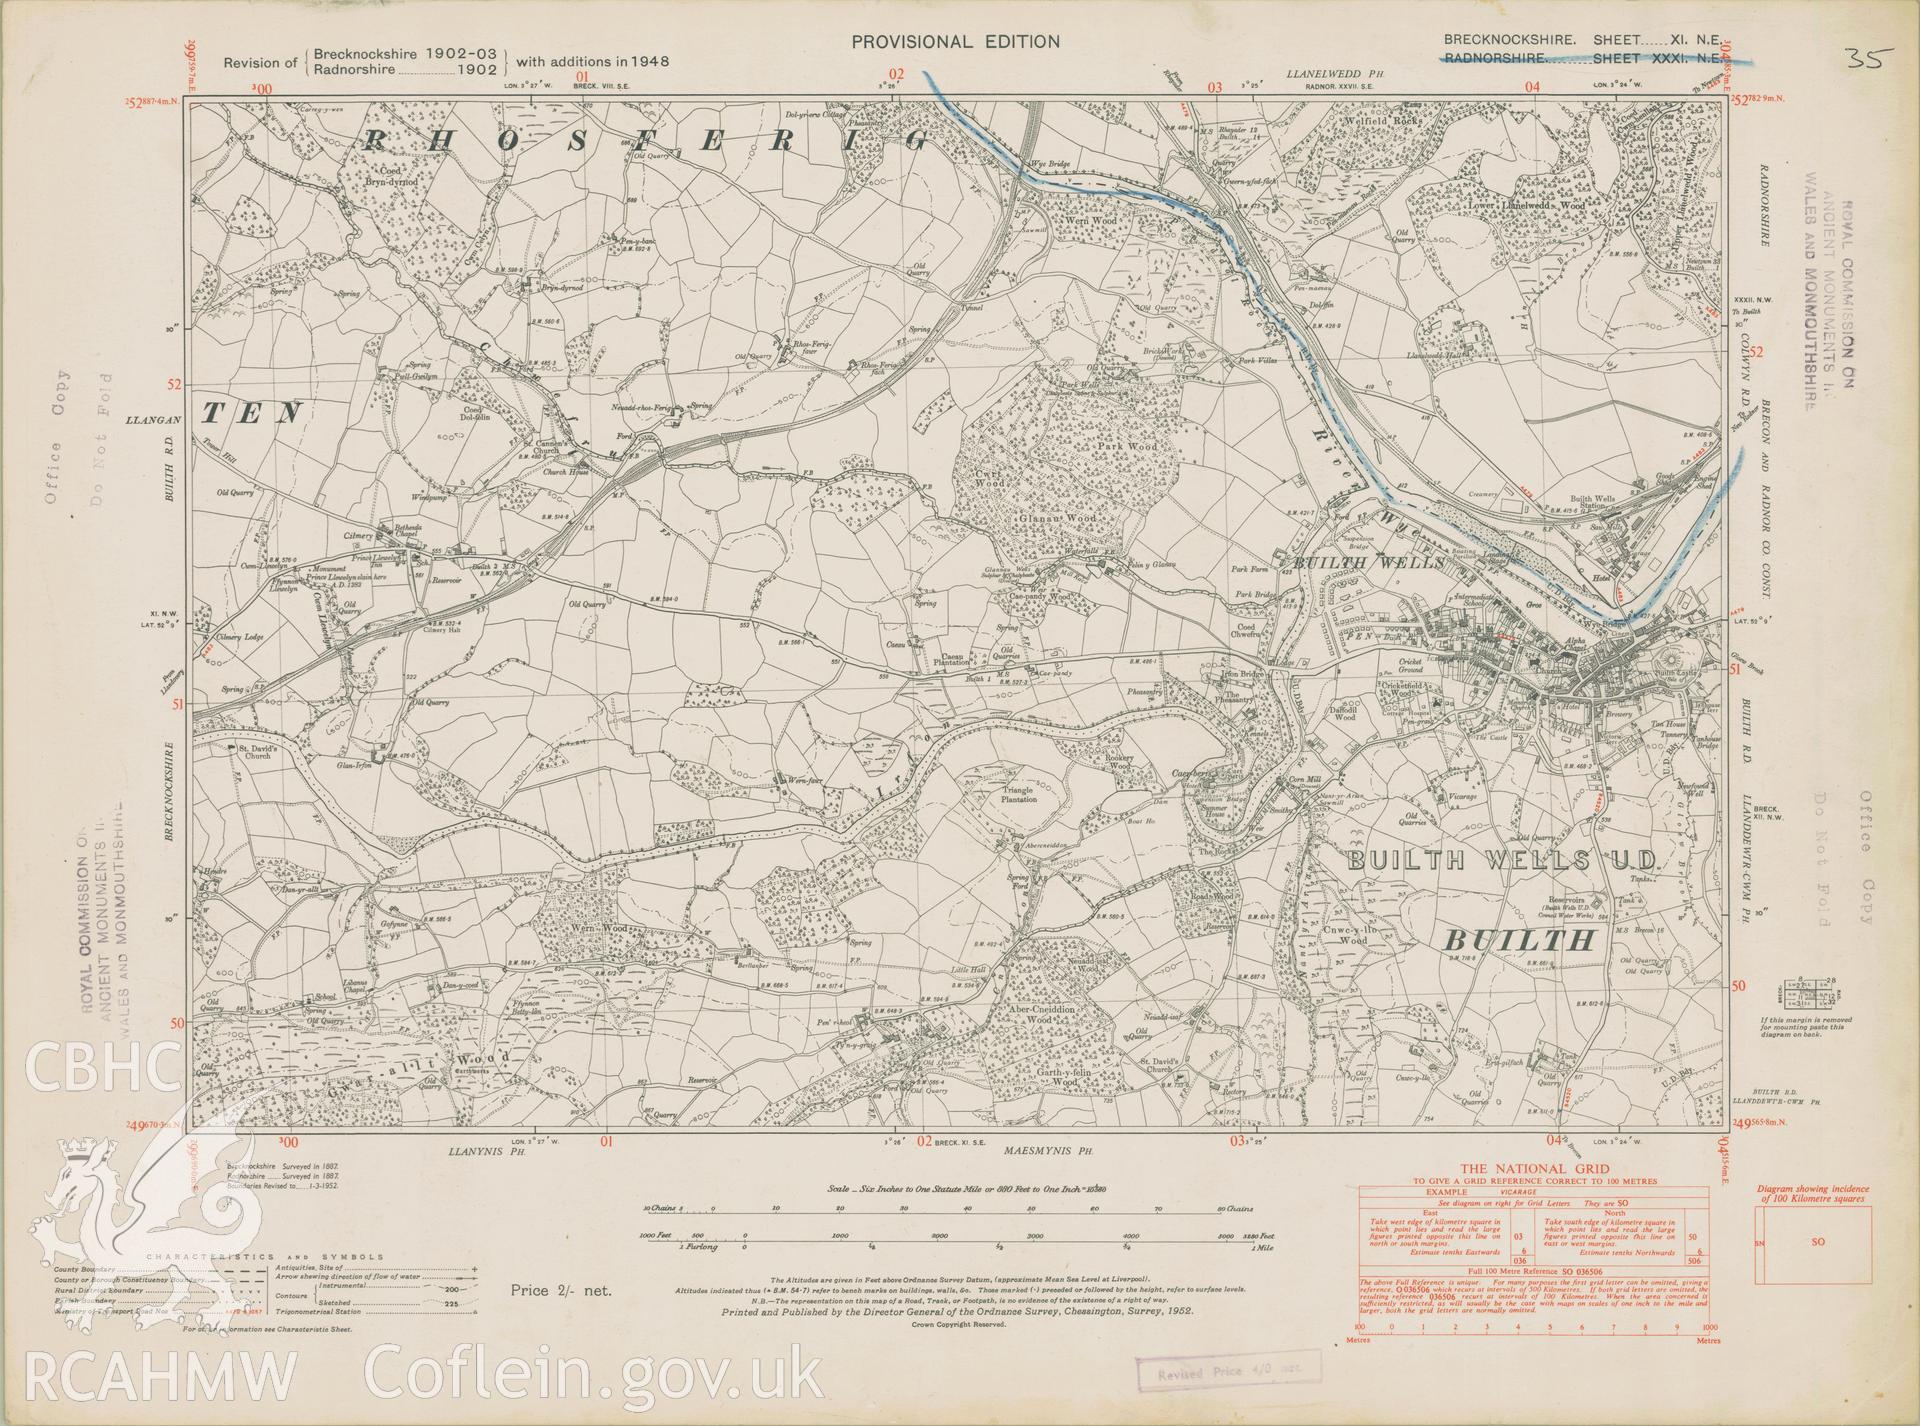 Digital copy of a six inch Ordnance Survey Provisional Edition map 1902-3 with additions in 1948, covering the area around Builth Wells.